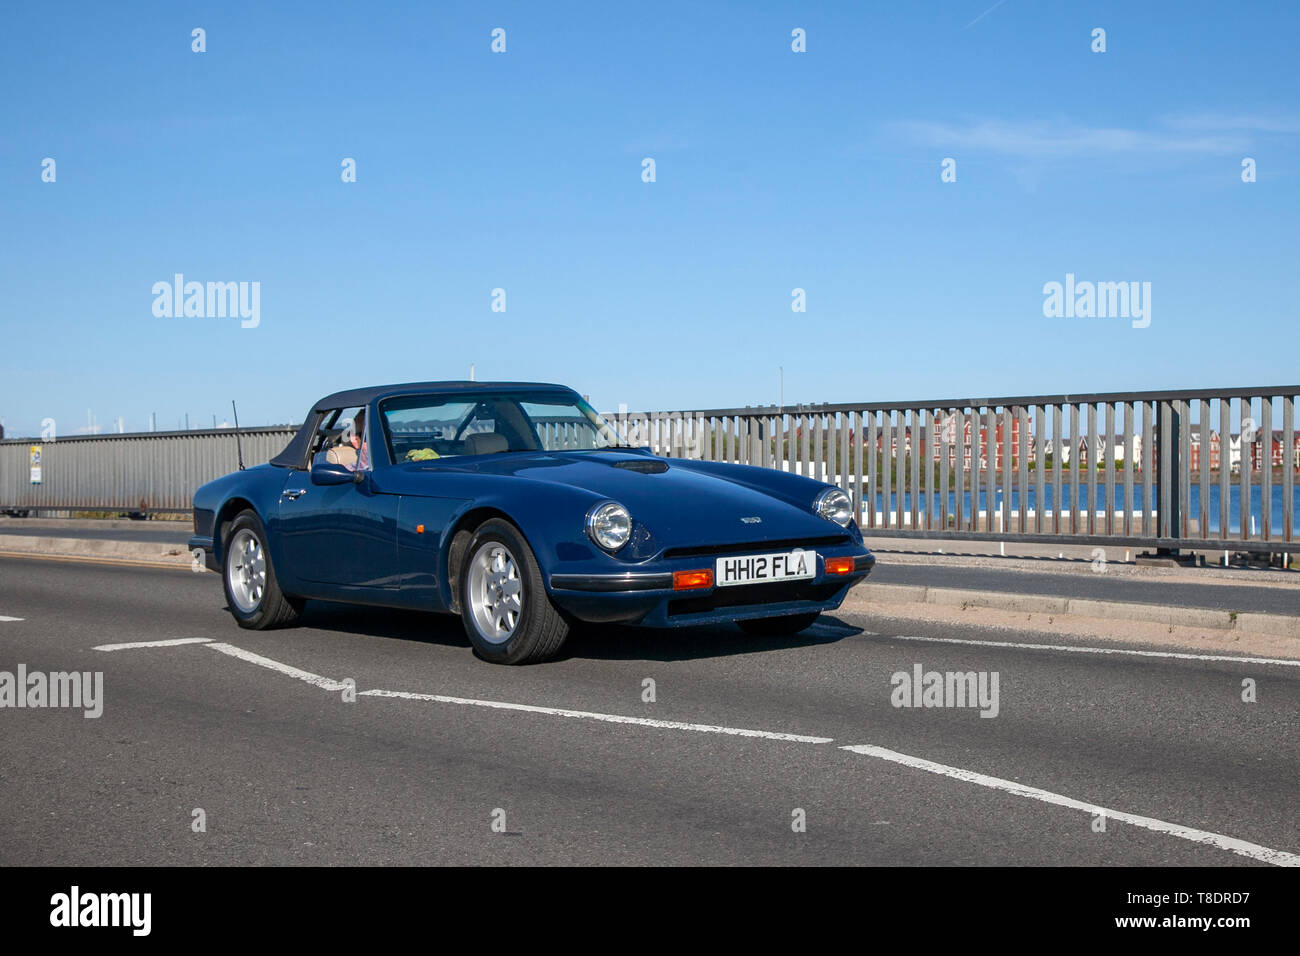 1990 blue Tvr 290 S being driven on Southport seafront promenade, UK Stock Photo